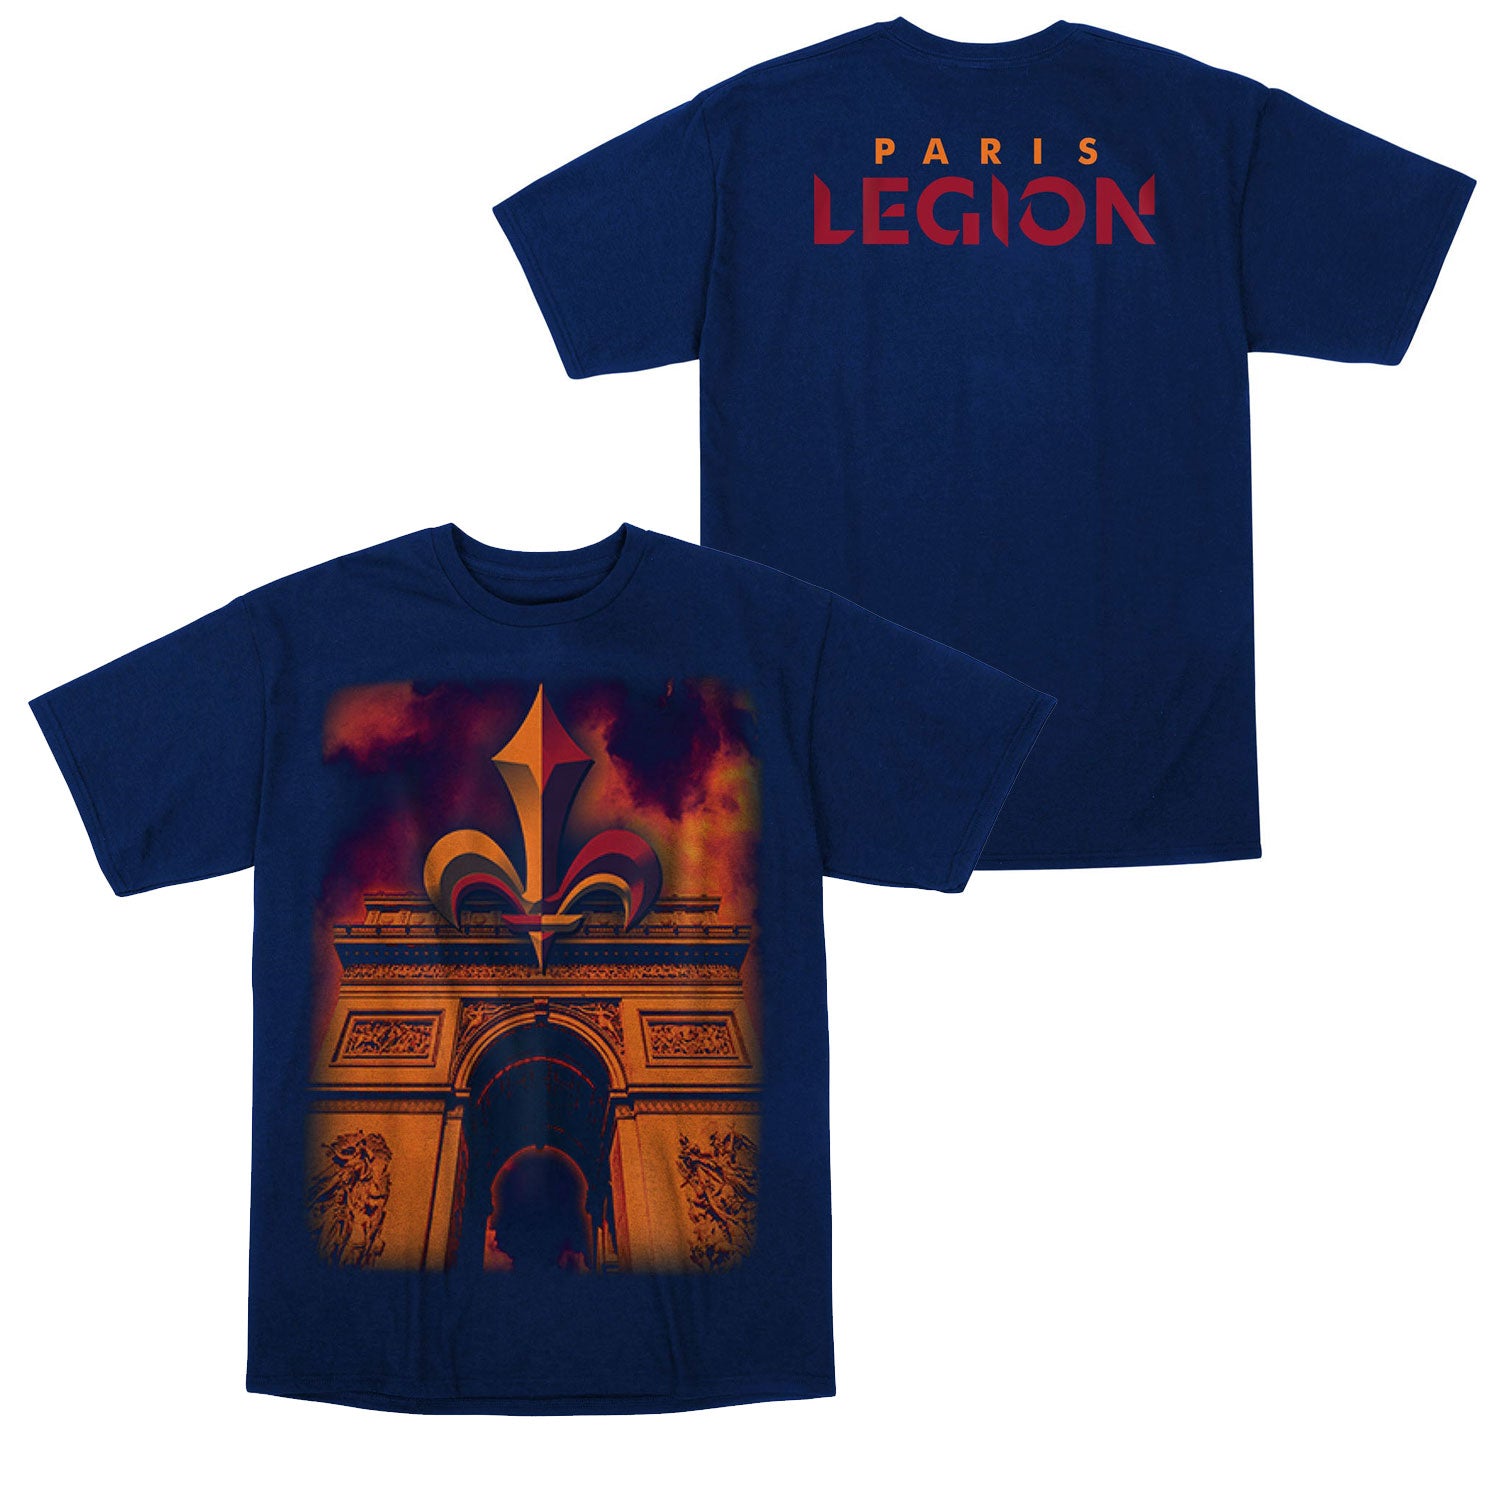 Paris Legion Native Navy T-Shirt - Front and Back View